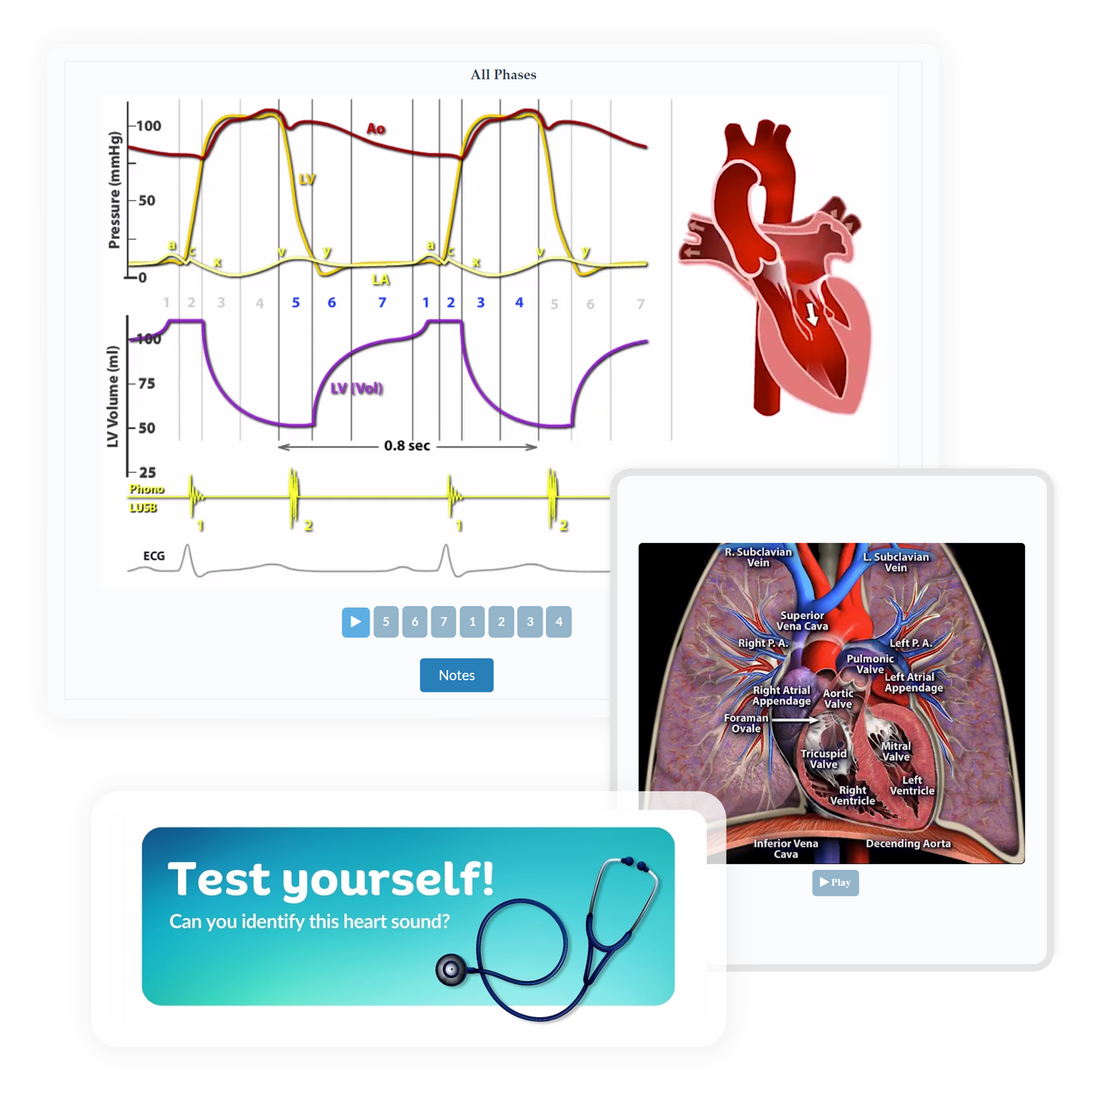 Scenes from inside heart sounds. Various heart illustrations and ecg charts